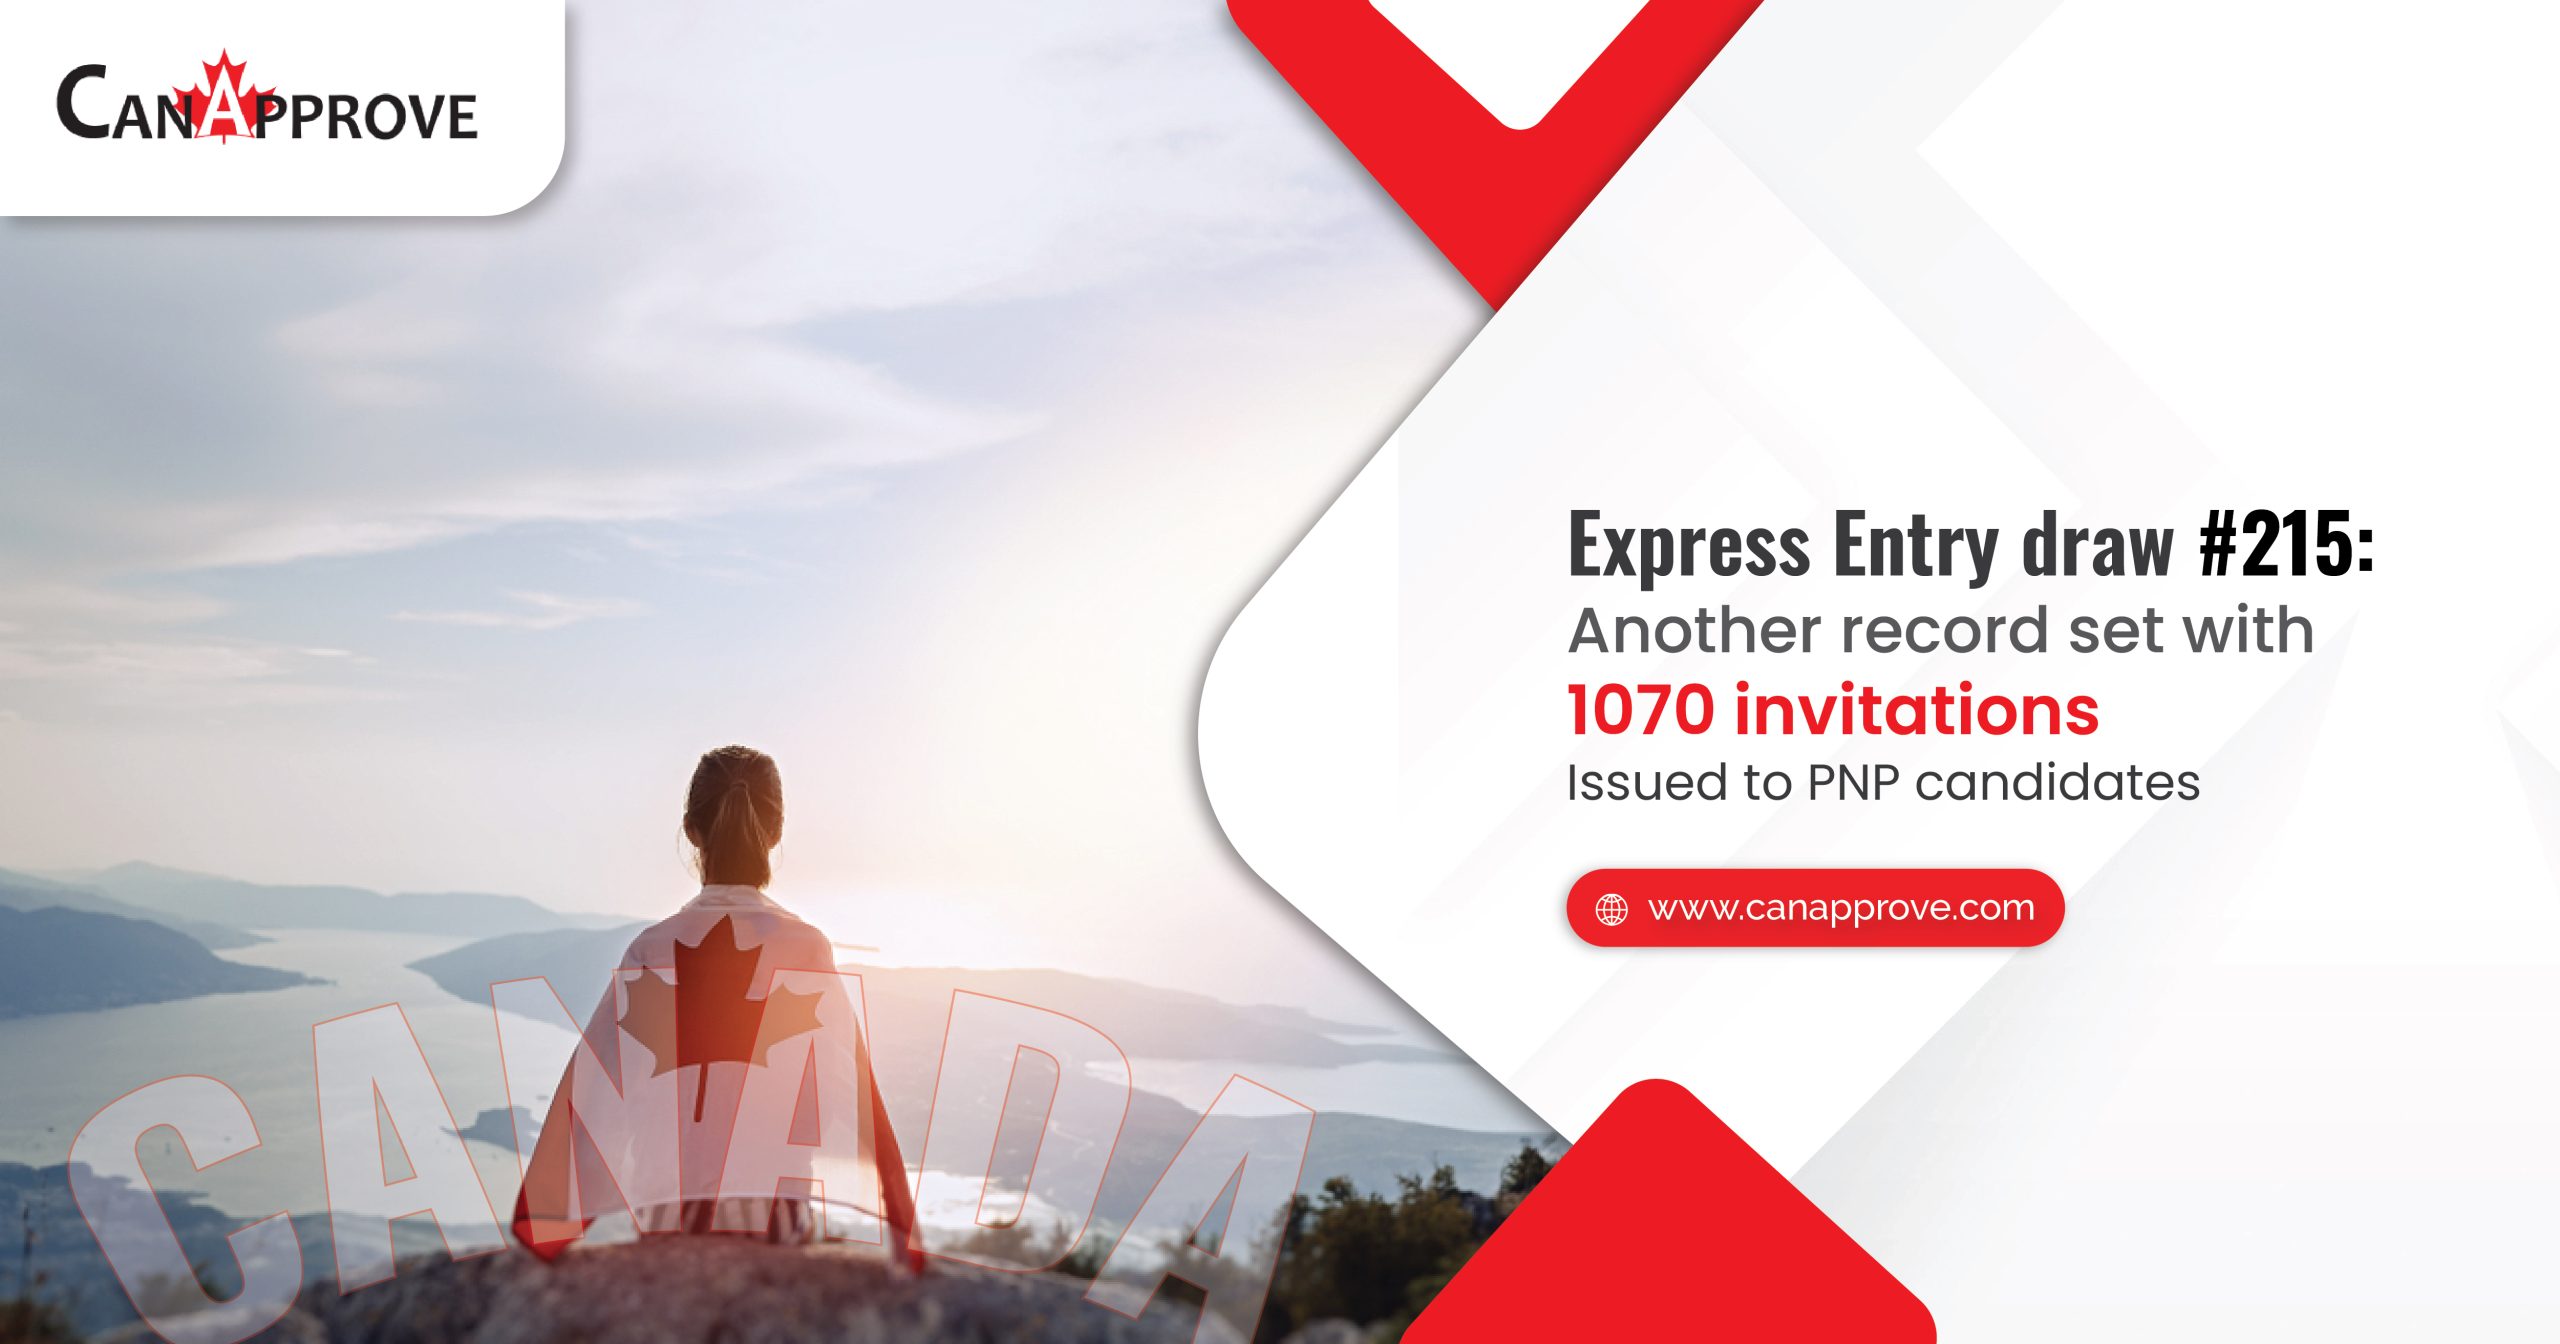 Feb 2 Express Entry draw sets new record